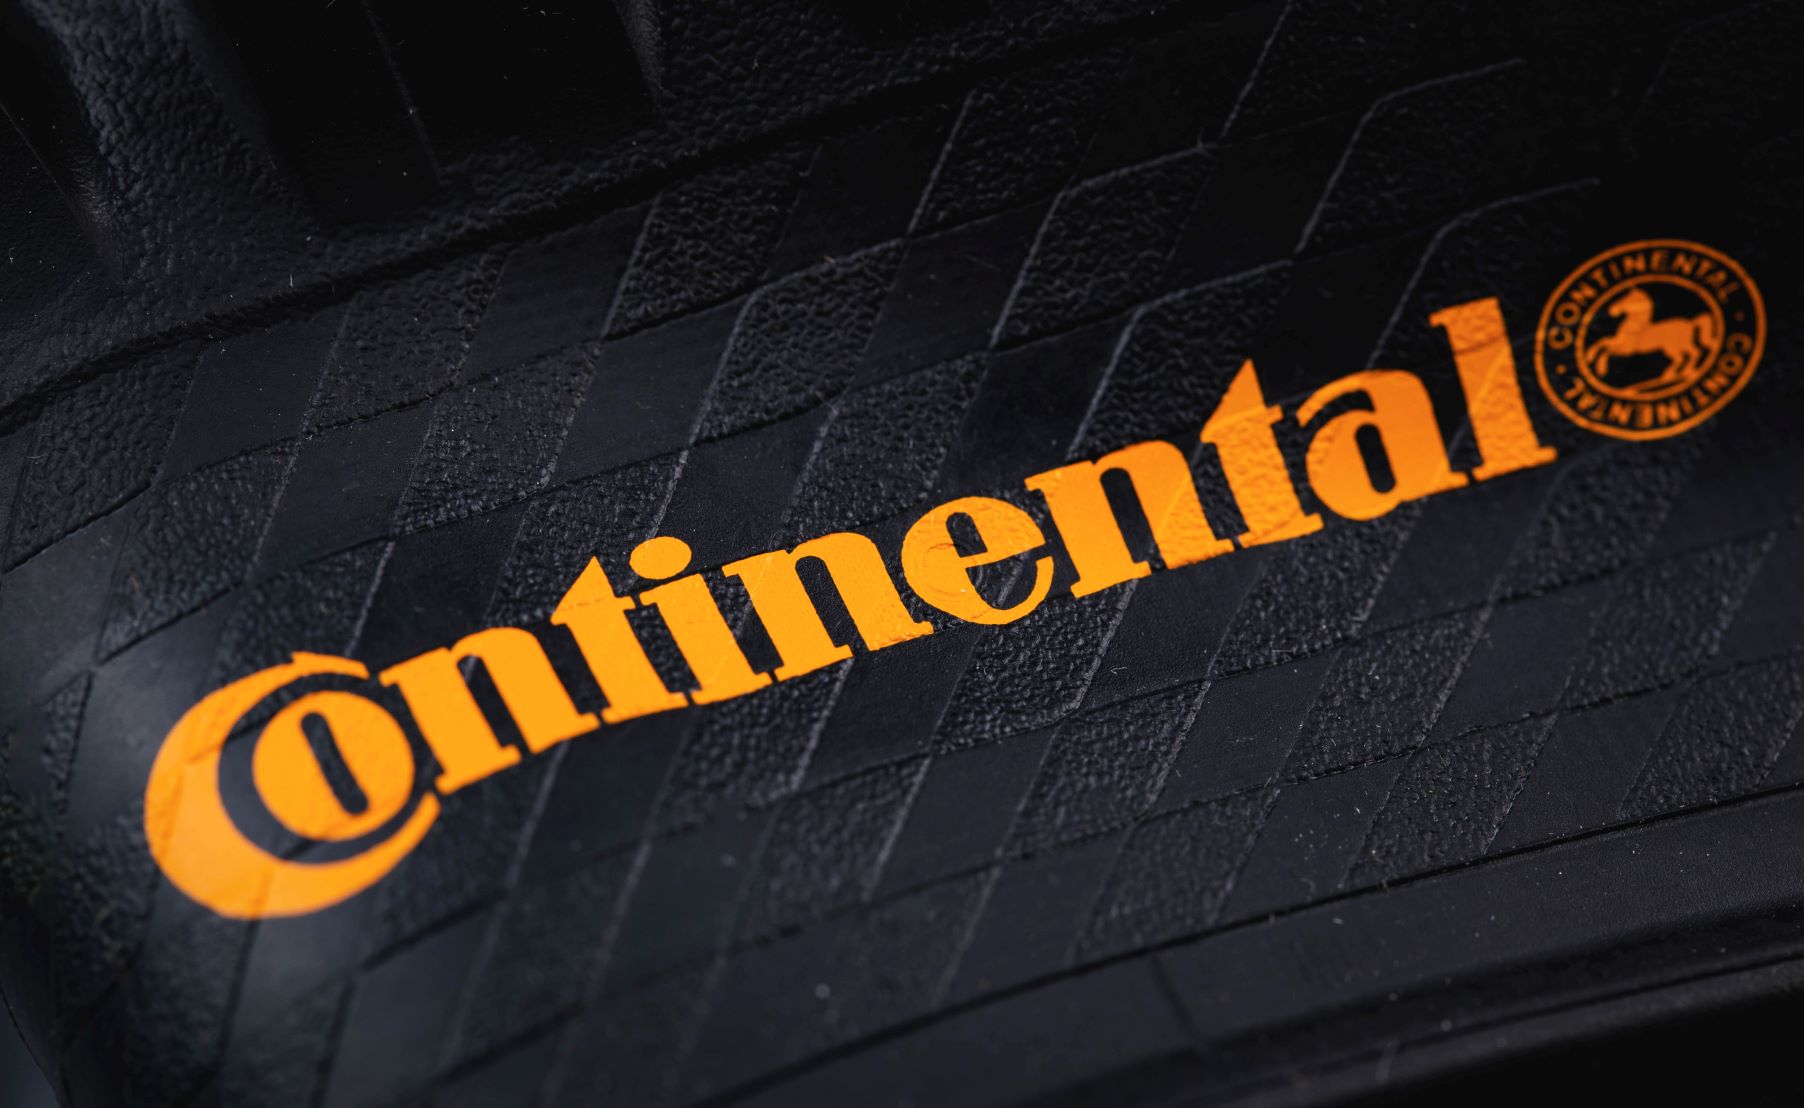 Stock of the day: Continental